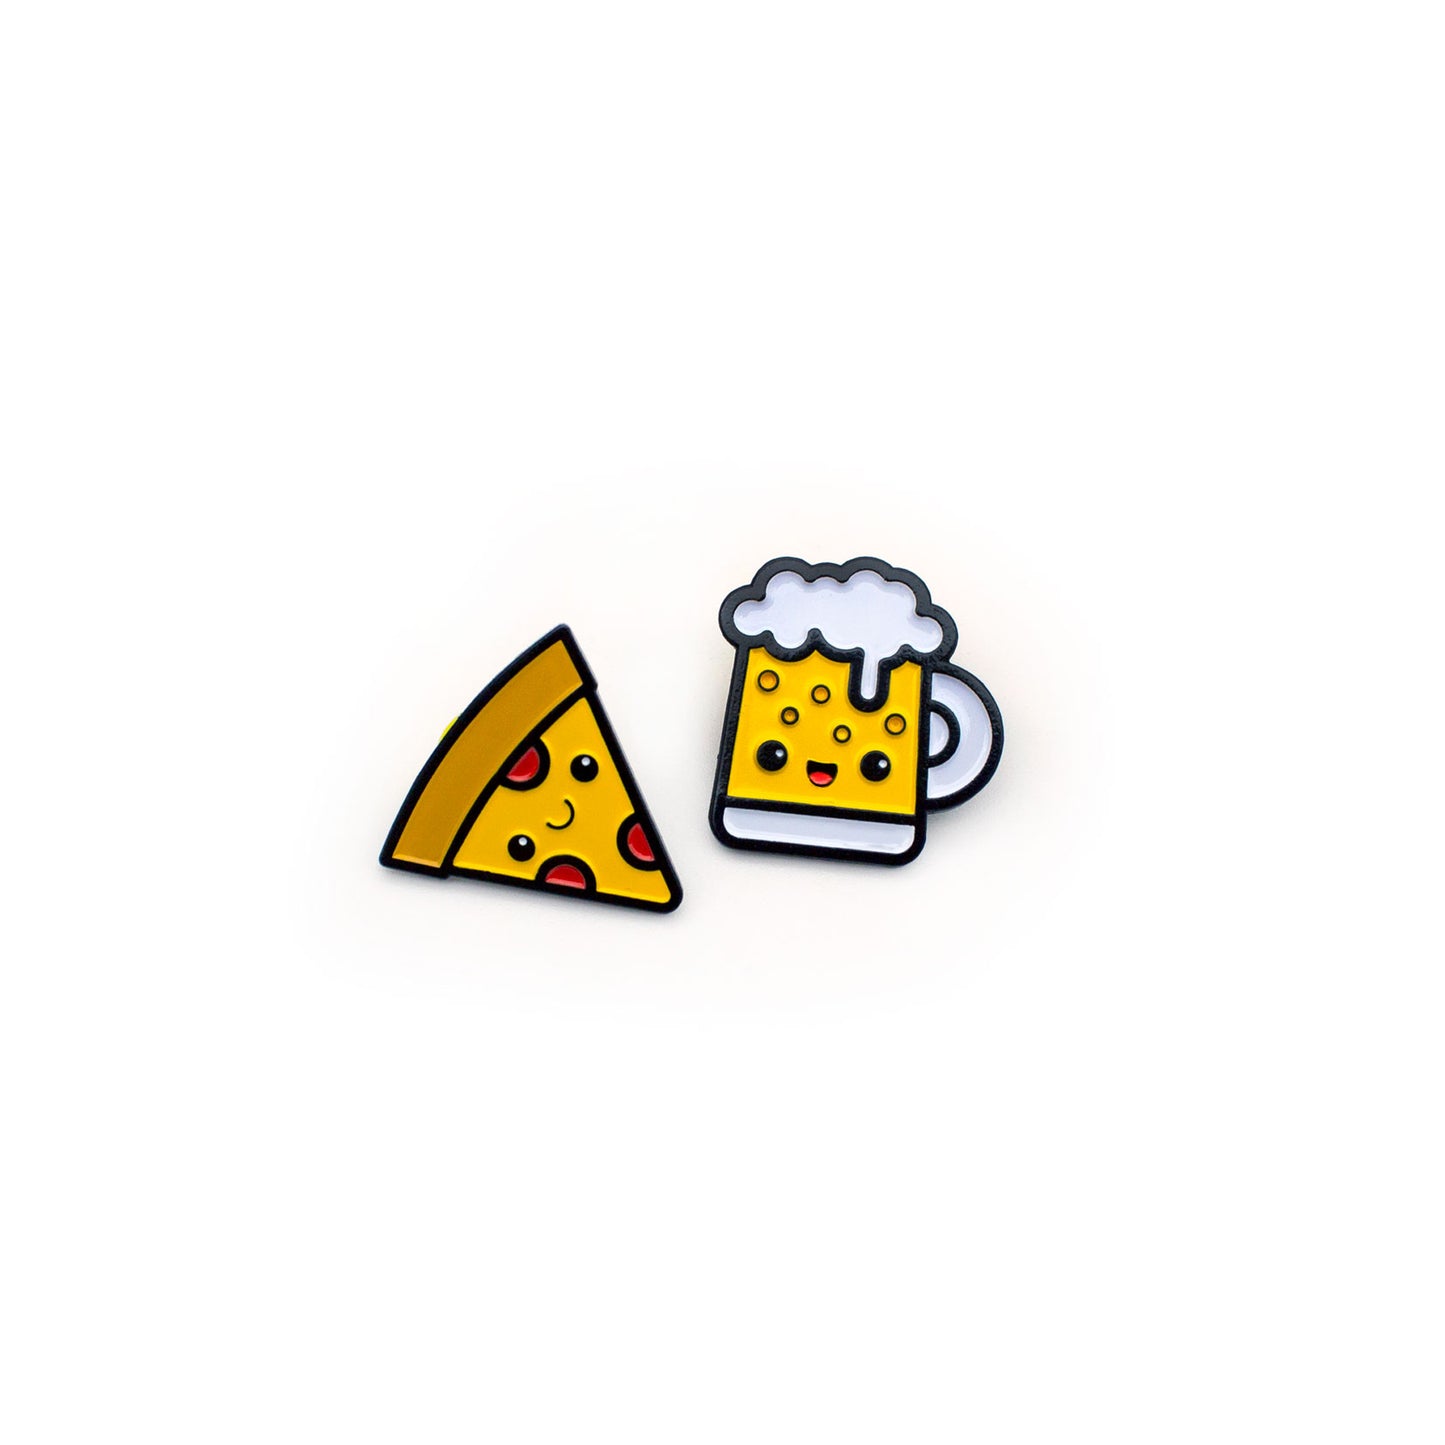 Pizza and Beer enamel pins on white background